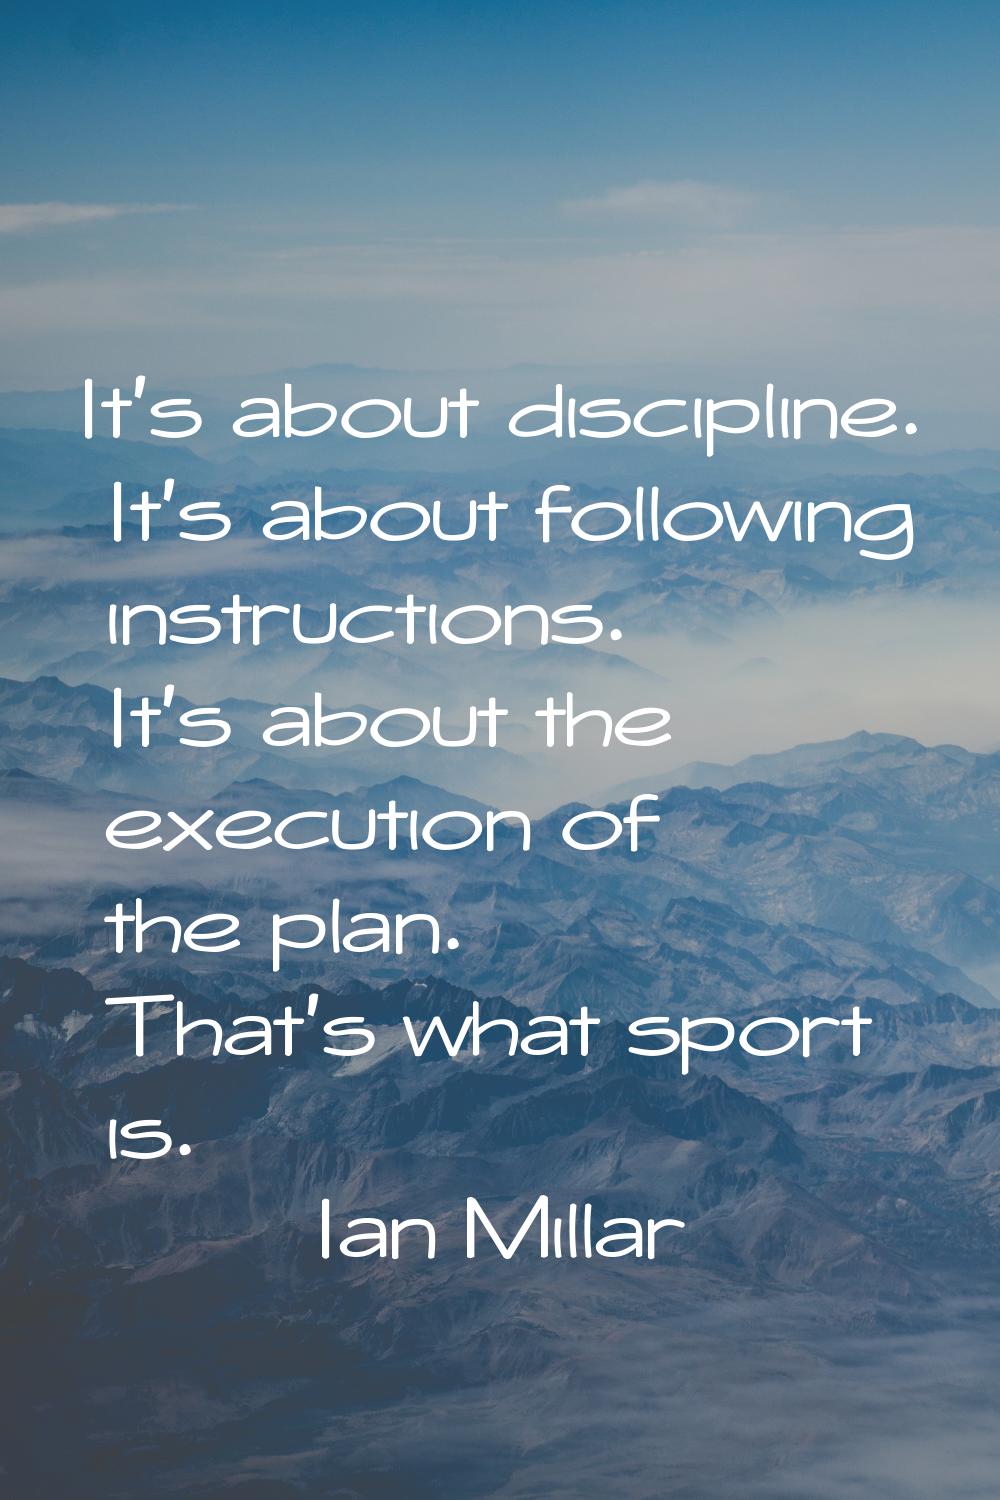 It's about discipline. It's about following instructions. It's about the execution of the plan. Tha